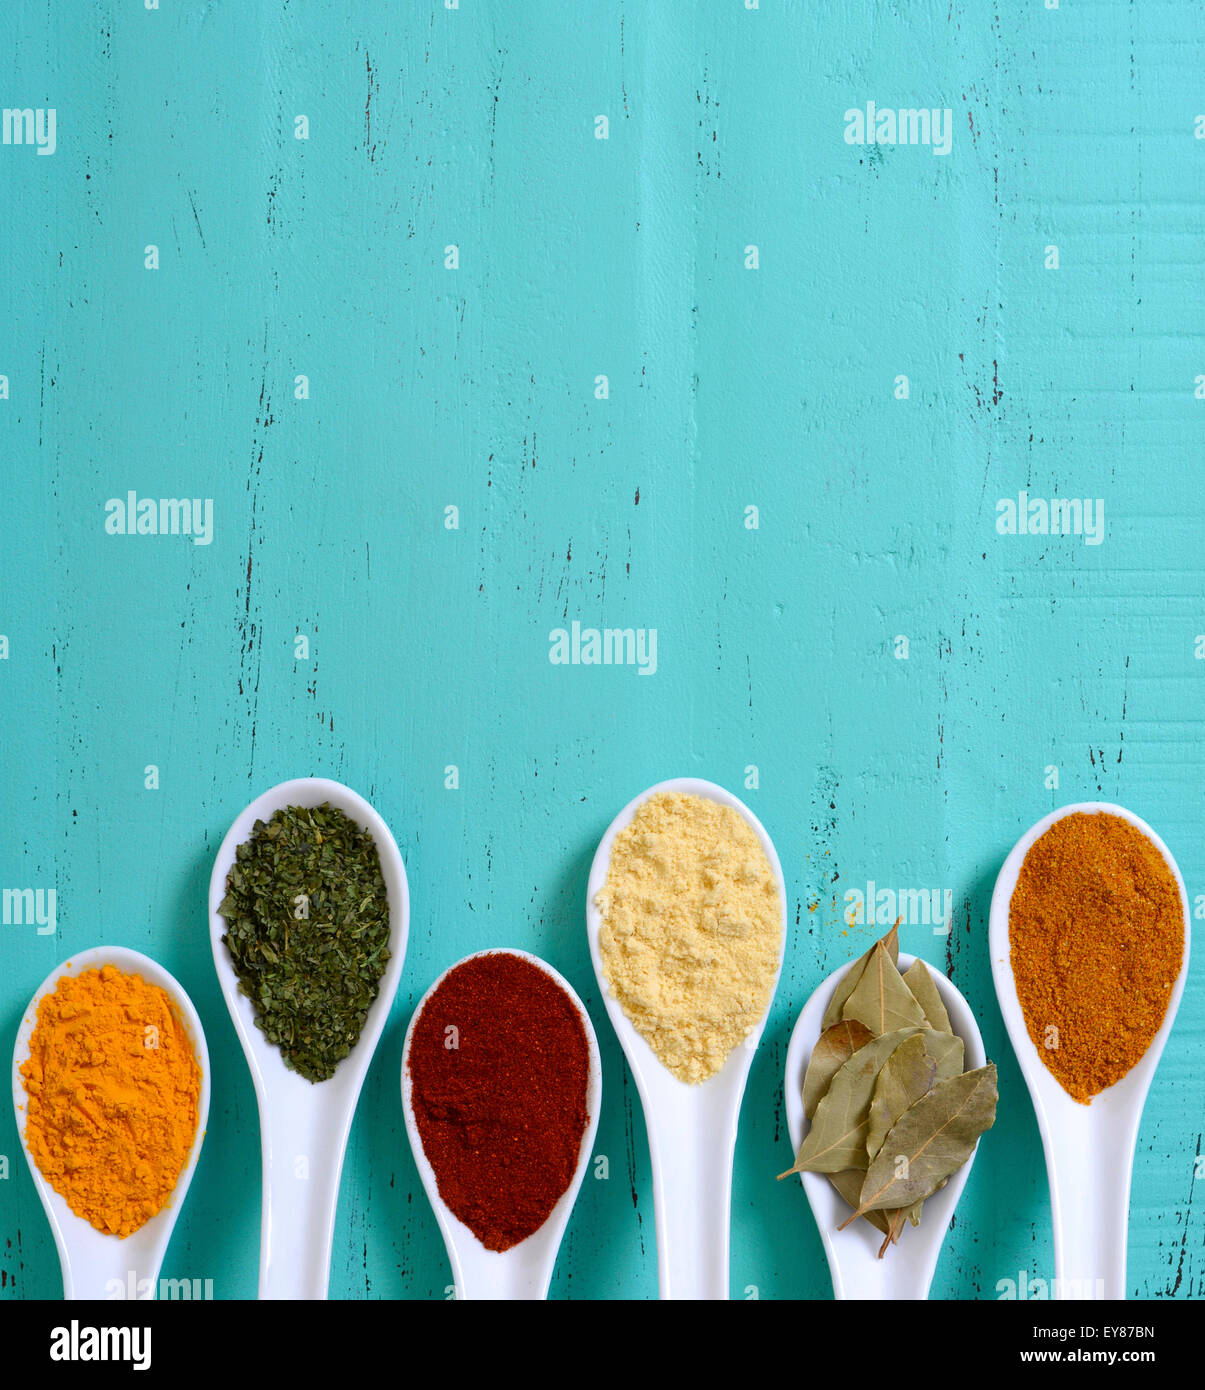 Colorful cooking spices and herbs in white spoons on vintage aqua blue table overhead with copyspace for your text here. Stock Photo